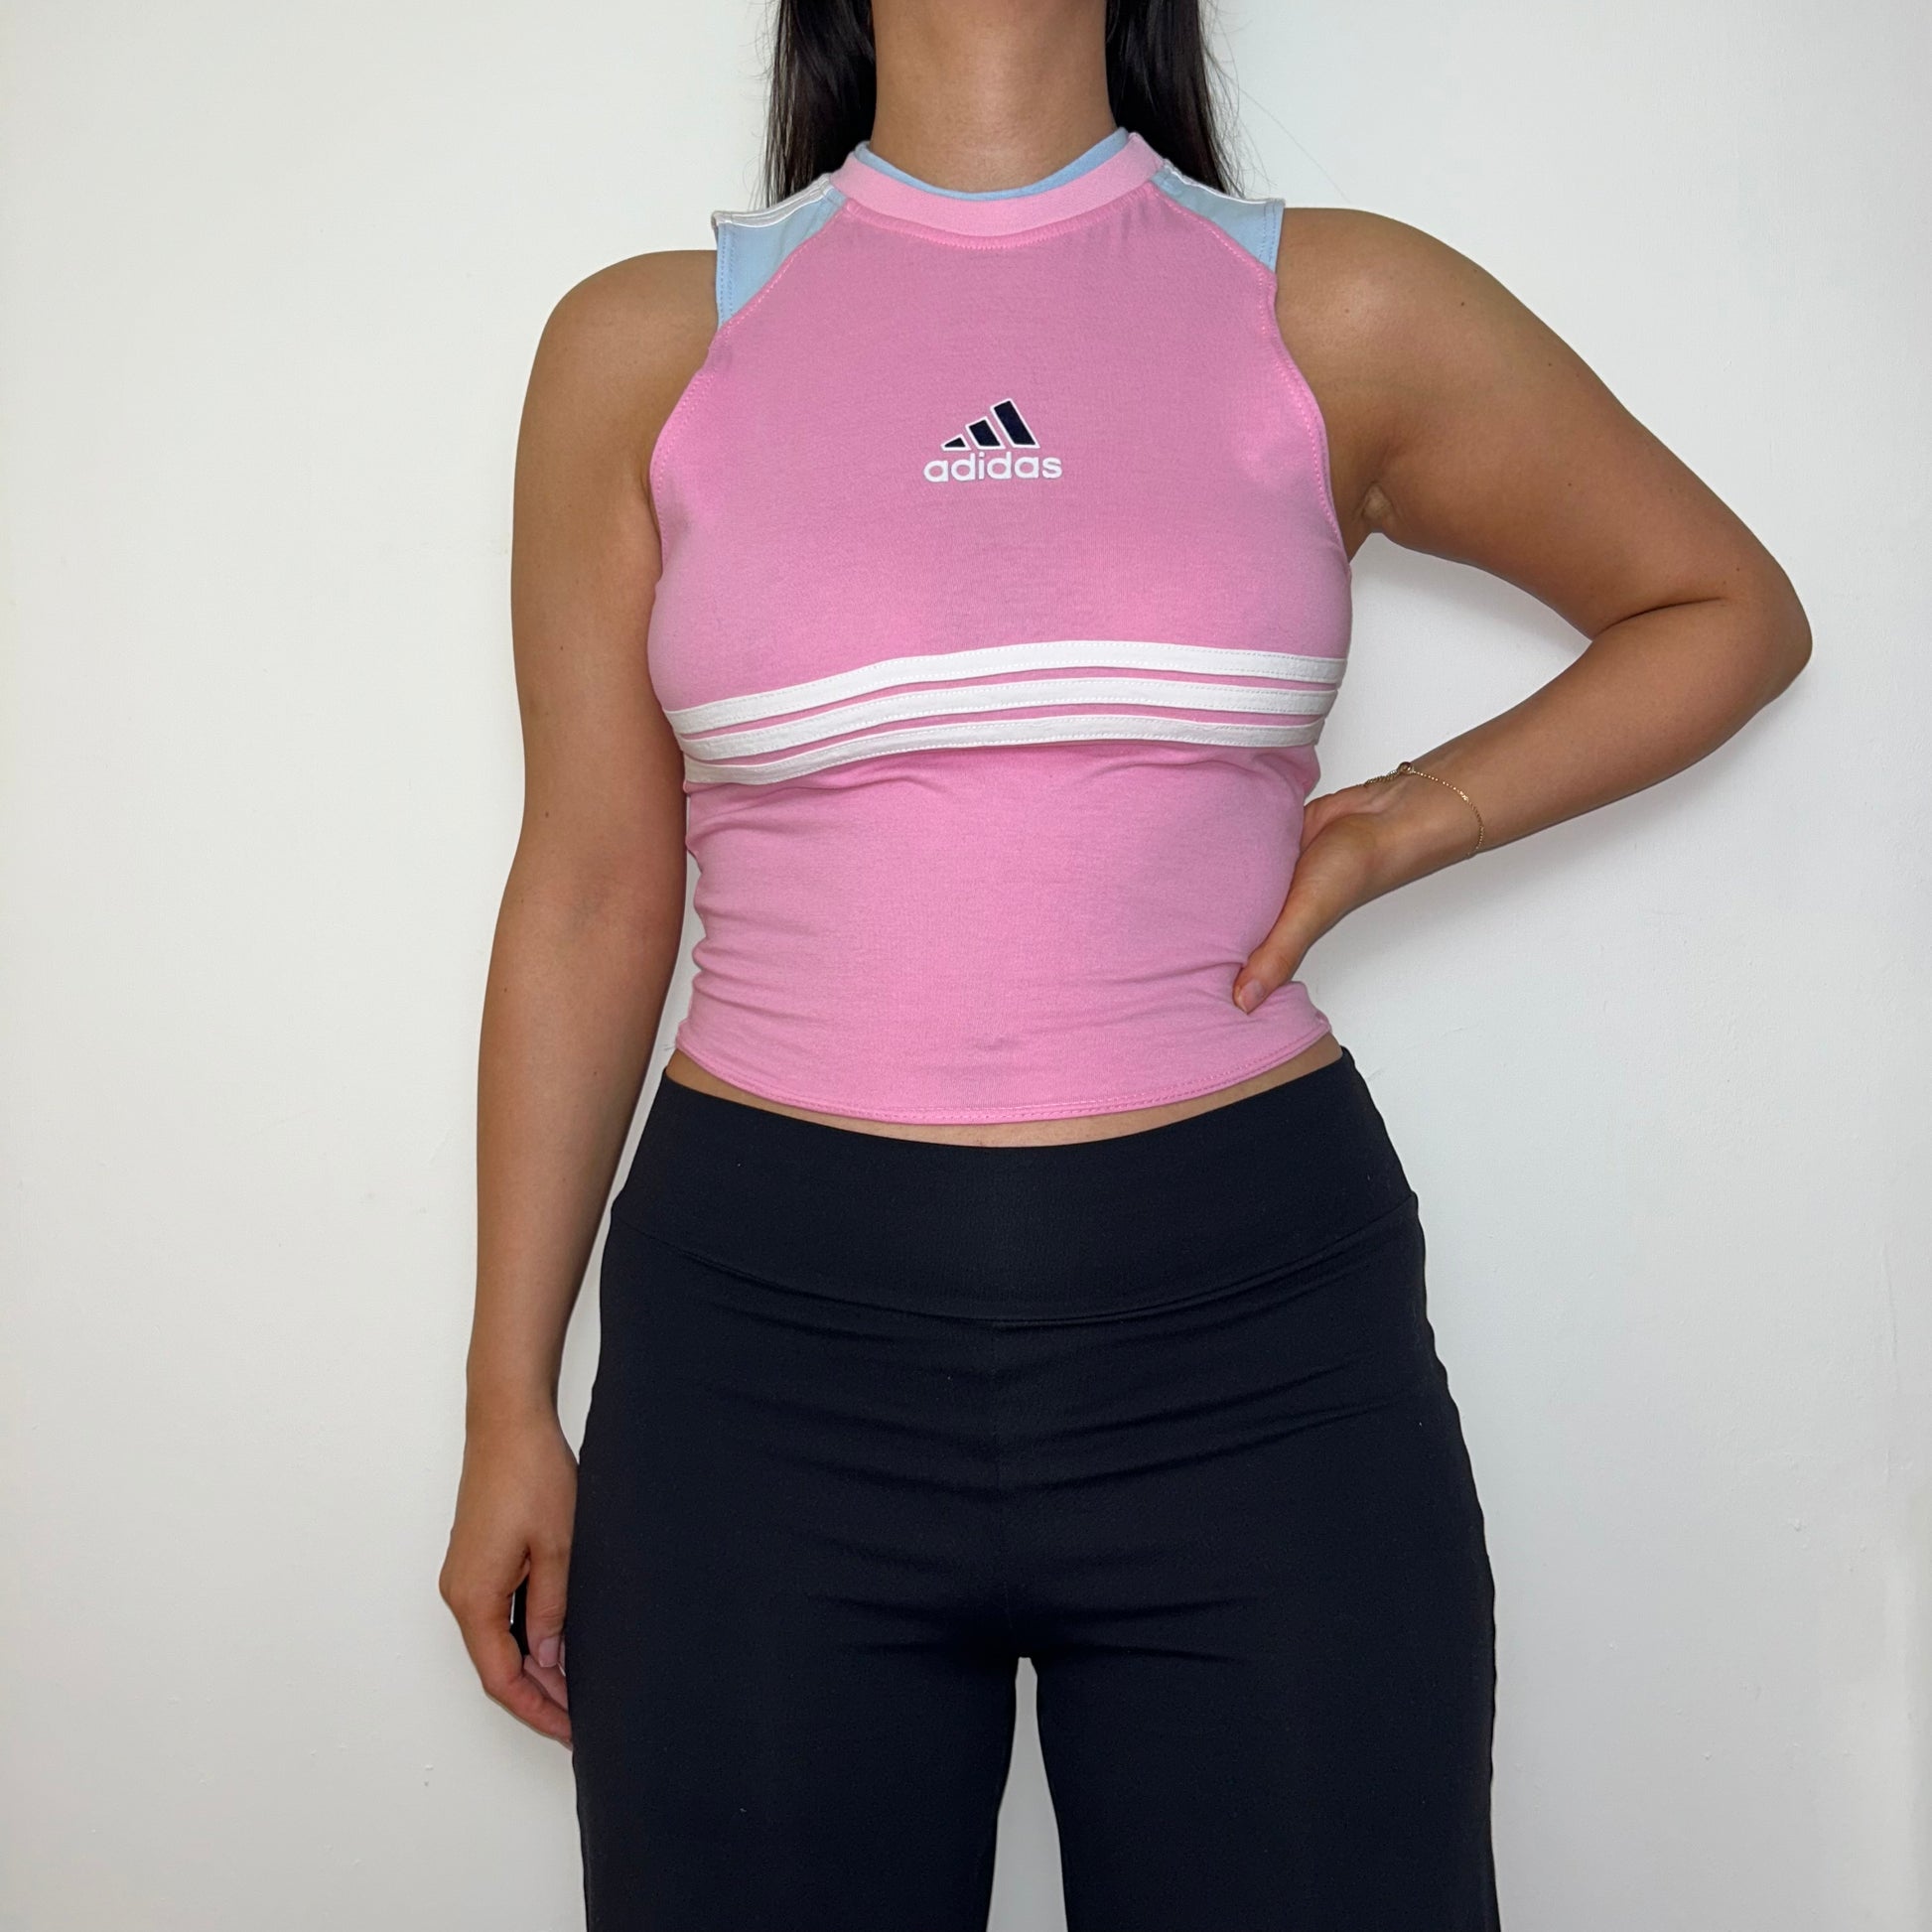 pink sleeveless crop top with black and white adidas logo shown on a model wearing black trousers